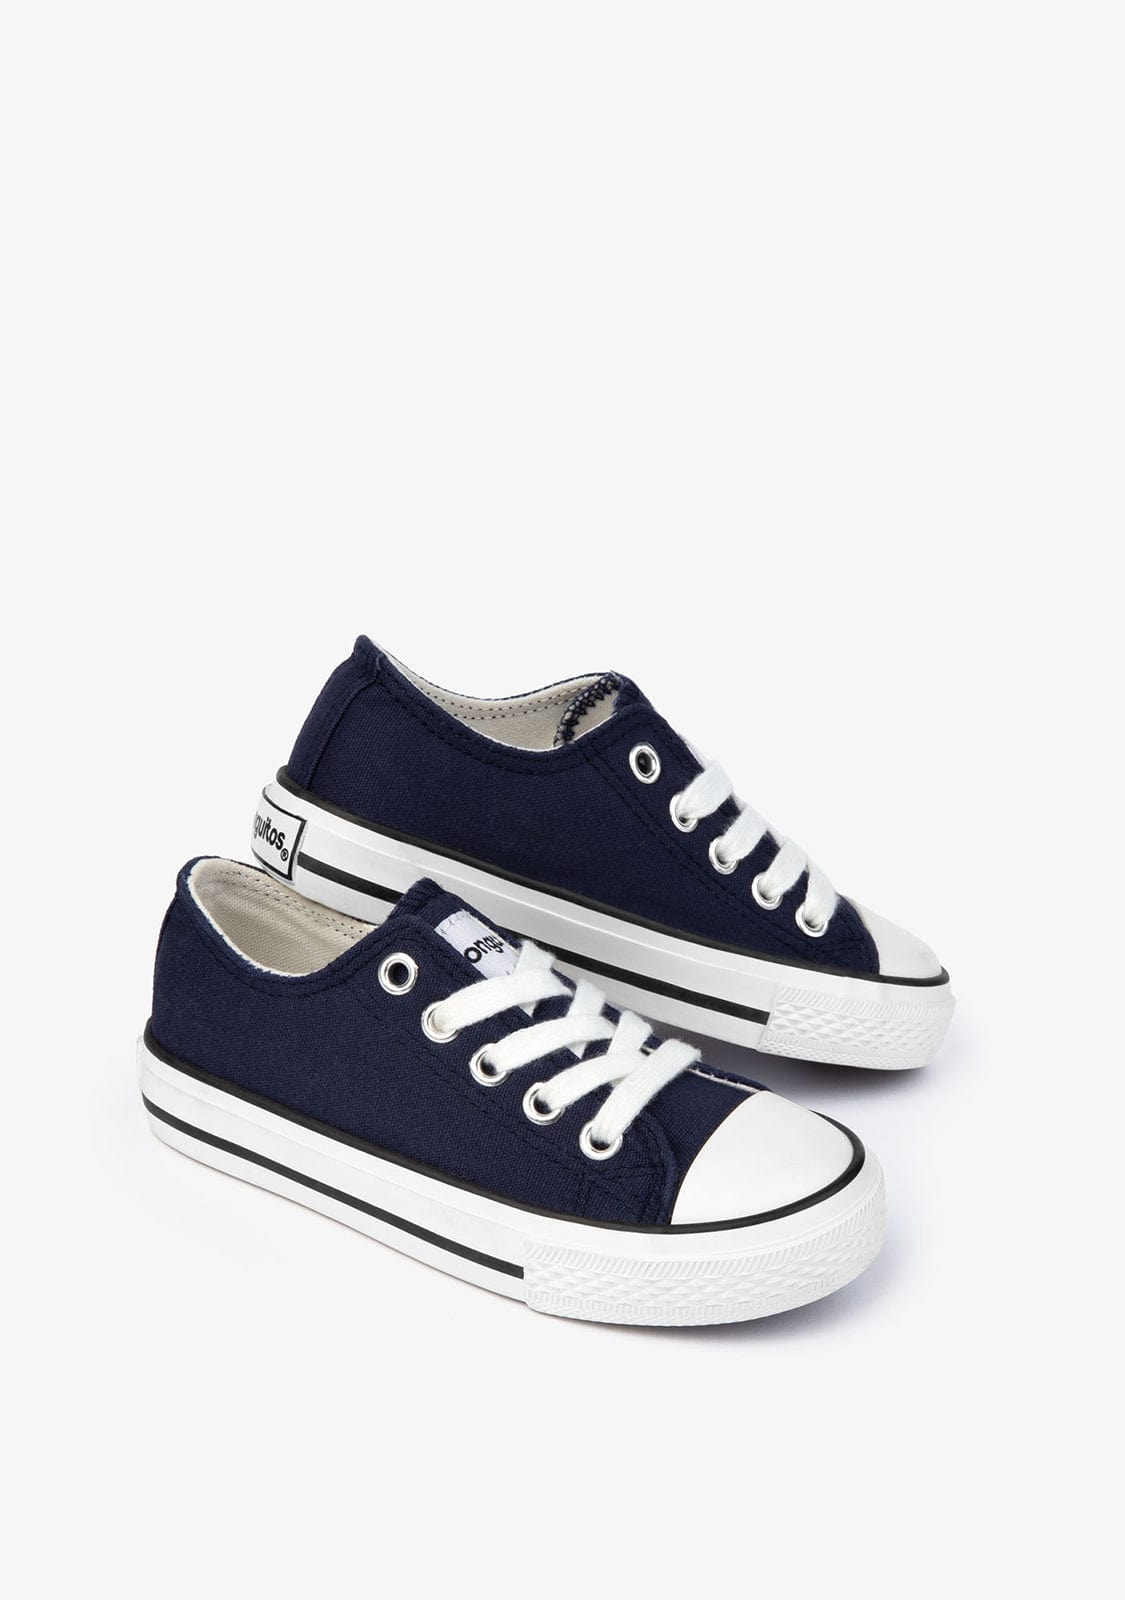 CONGUITOS Shoes Unisex Navy Basic Sneakers Canvas